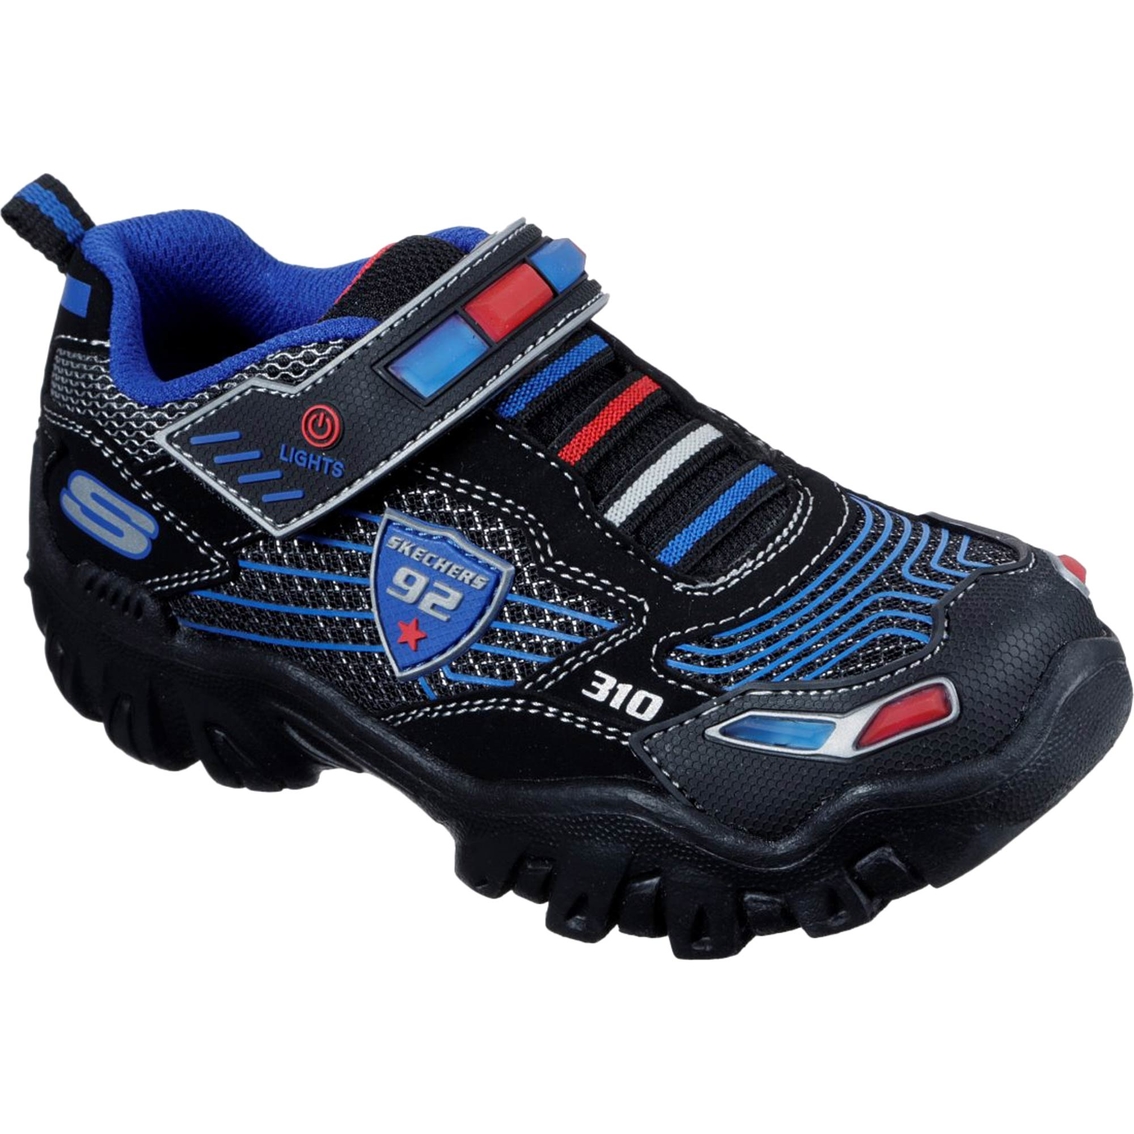 where to buy skechers light up shoes